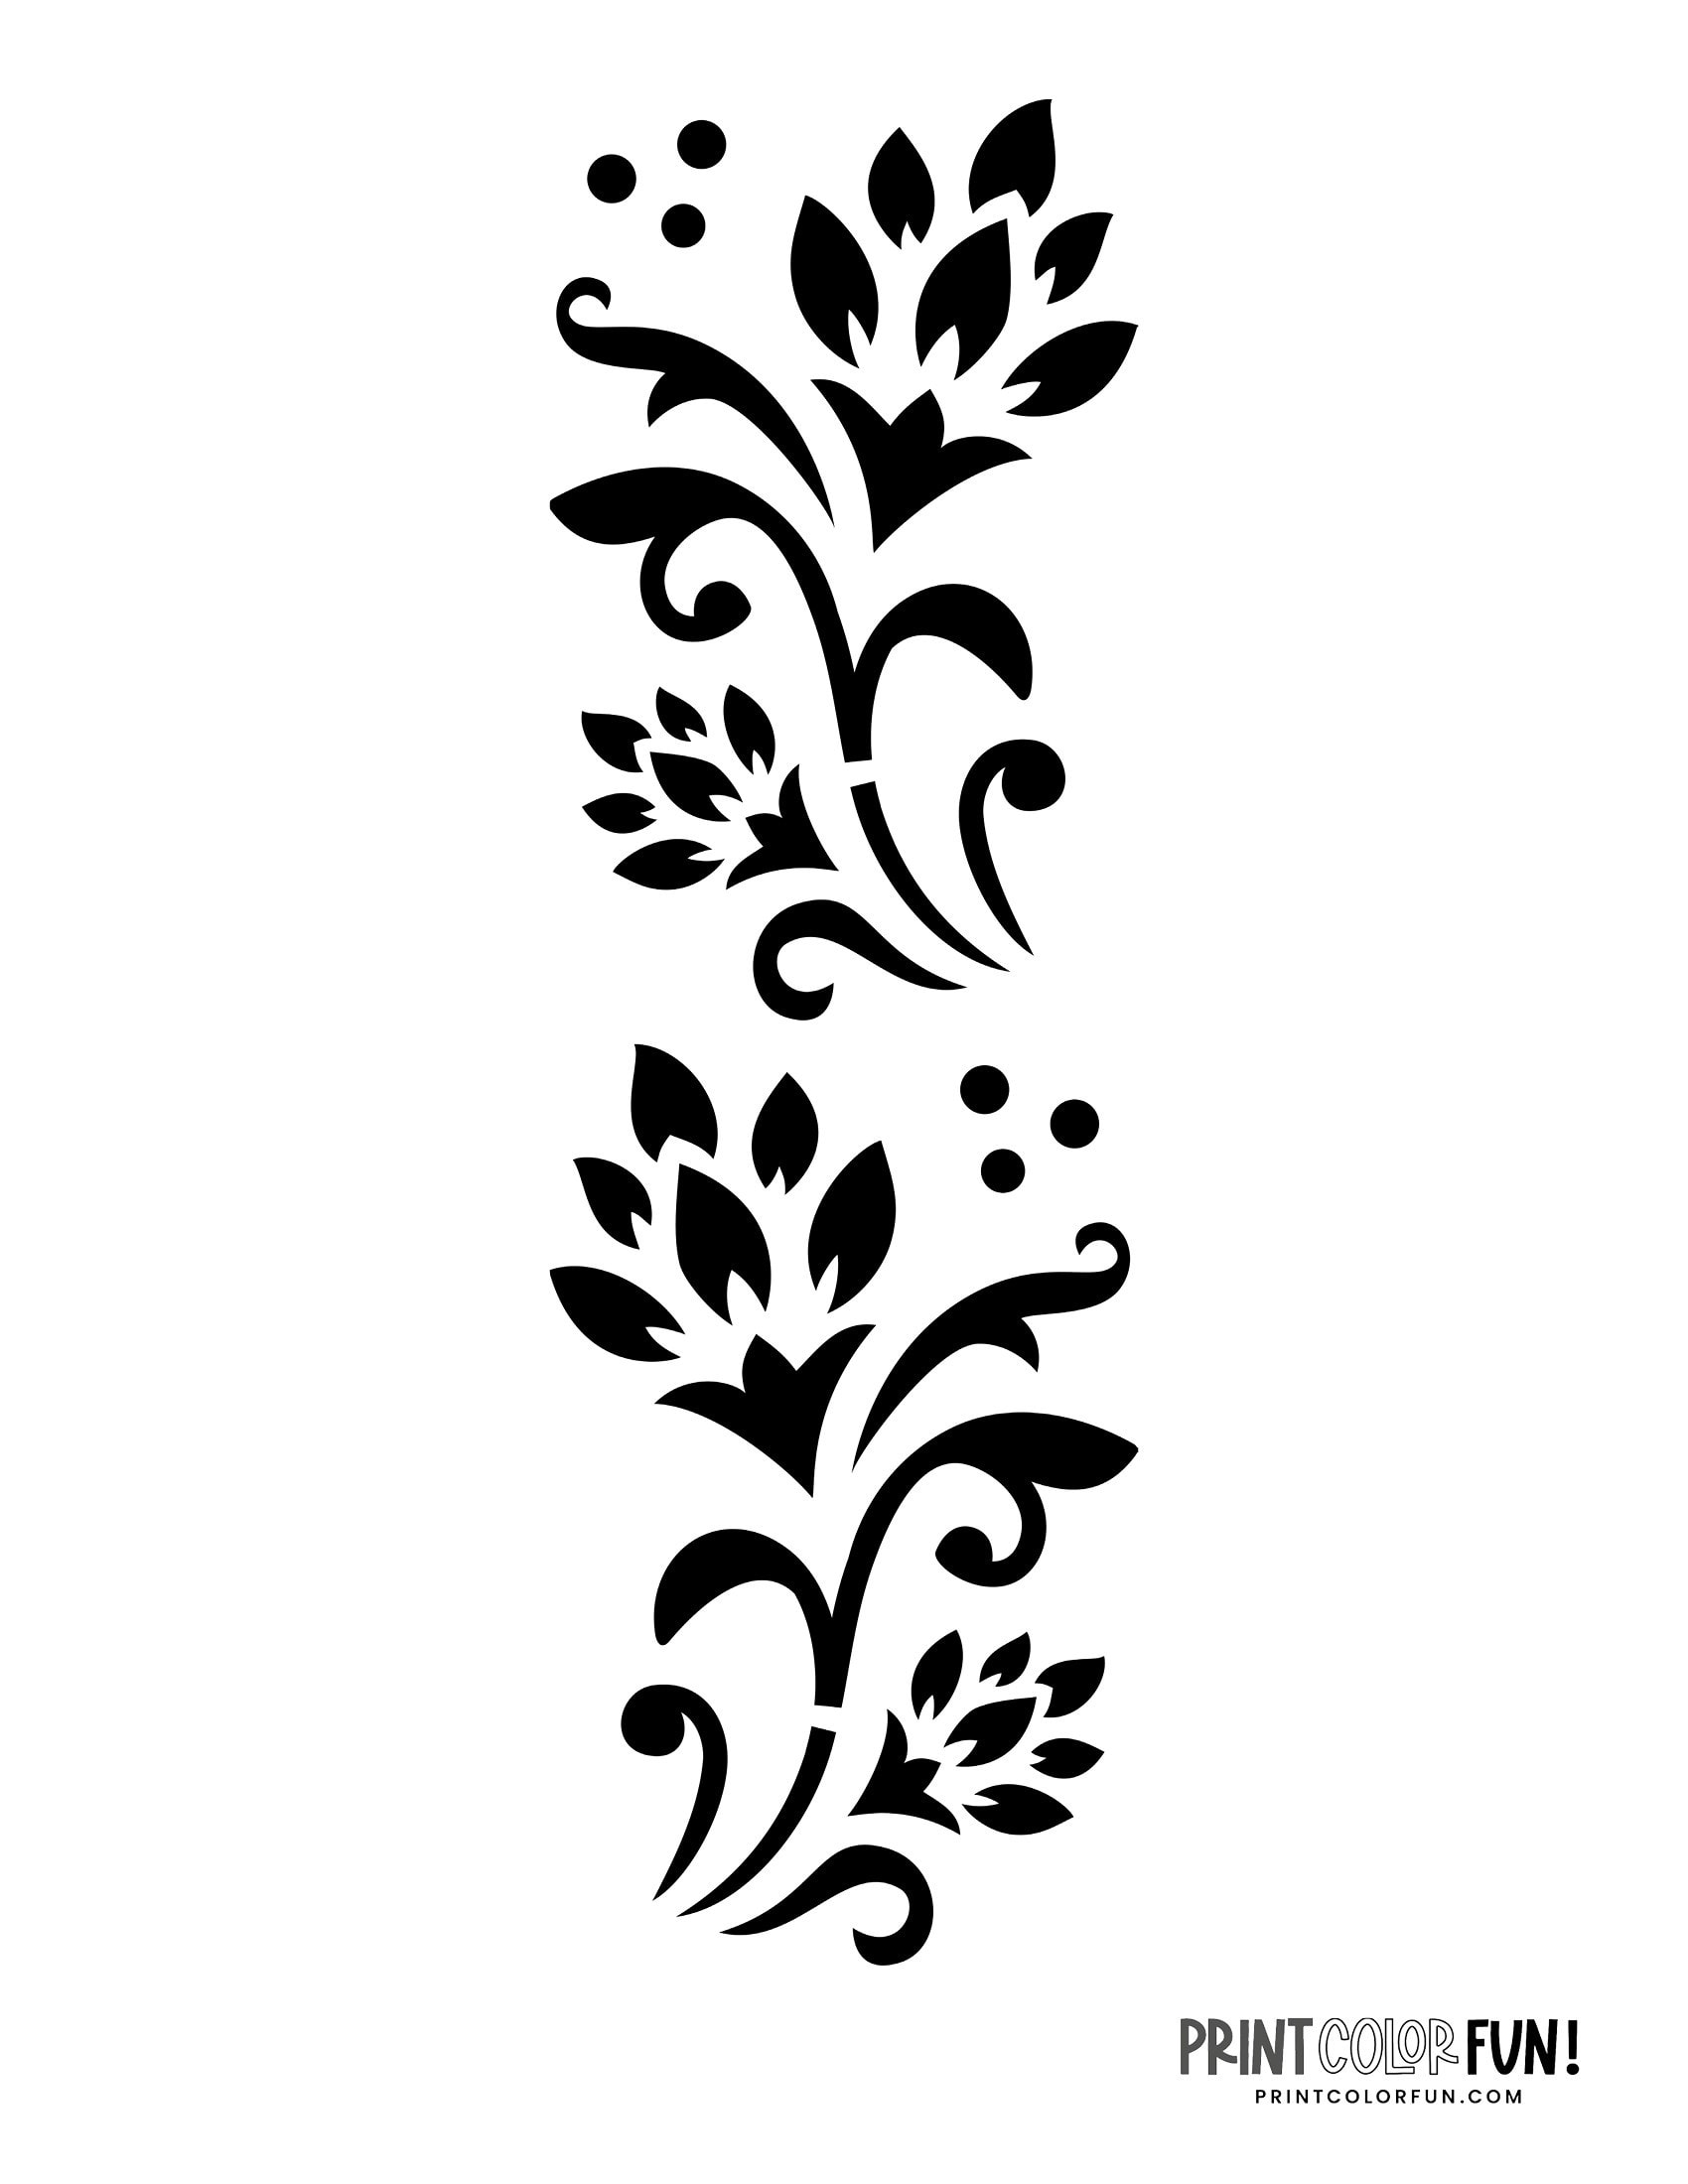 10 free flower stencil designs for printing craft projects print